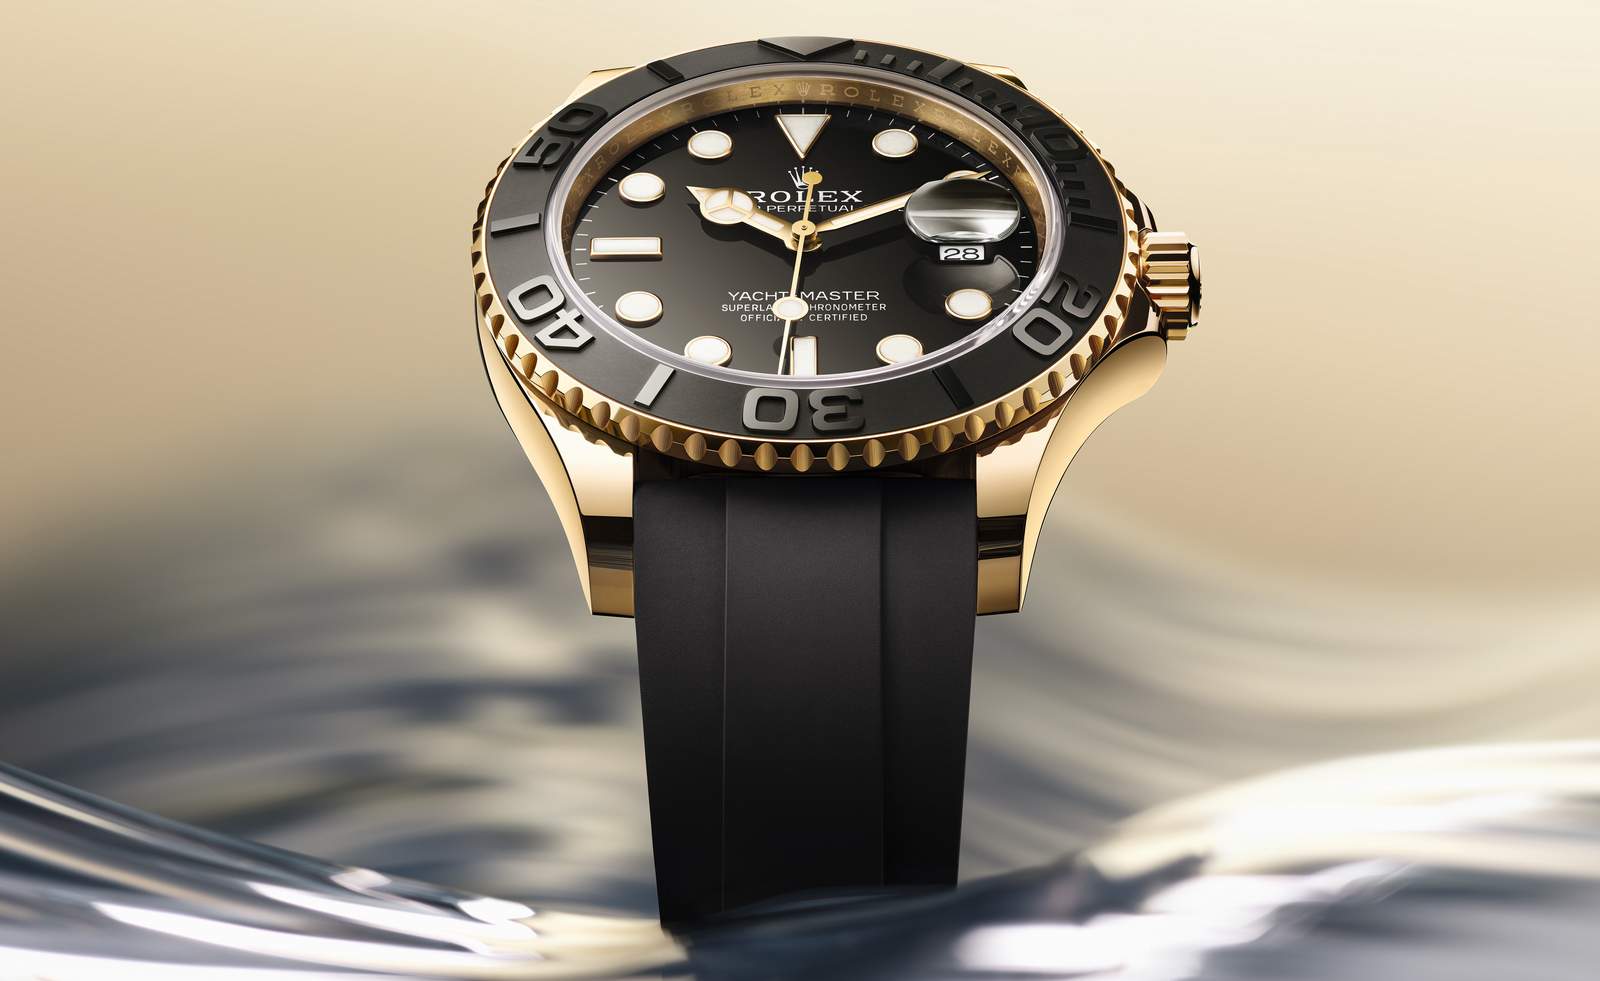 The Rolex Yacht-Master 42 range has been expanded with yellow gold and Falcon?s eye dial variants